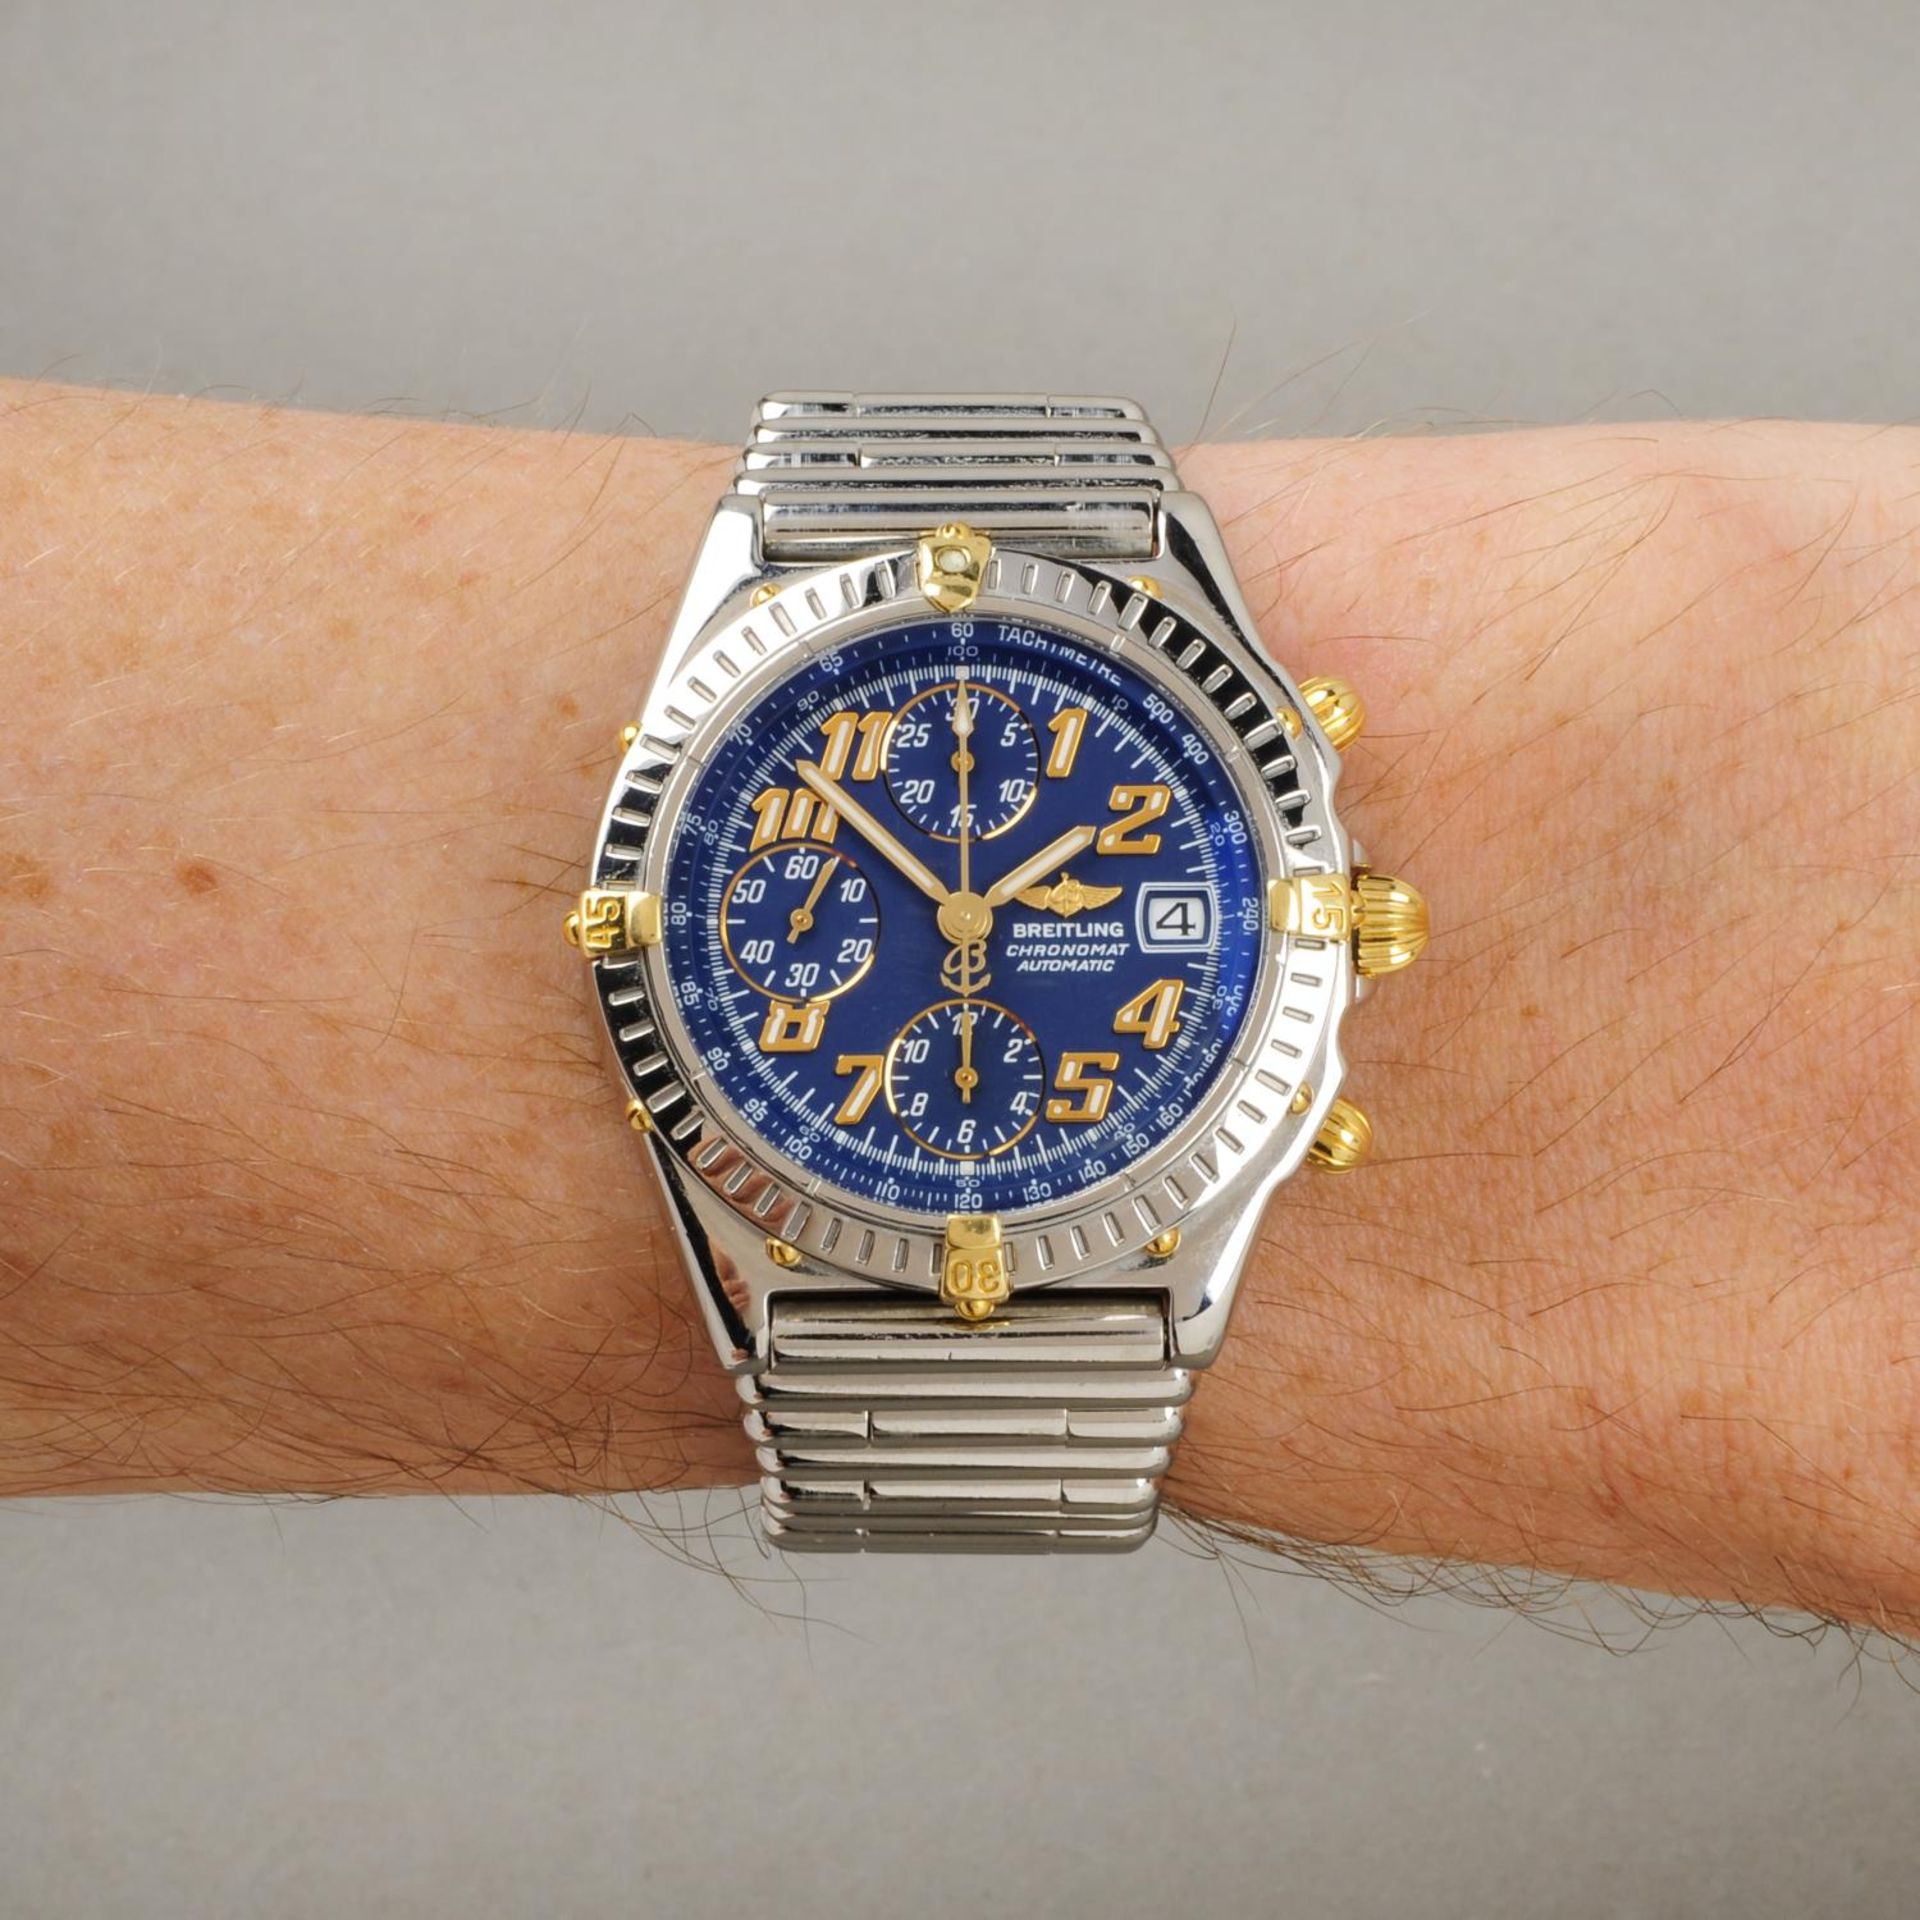 BREITLING - a gentleman's Chronomat Vitesse chronograph bracelet watch. Stainless steel case with - Image 3 of 7